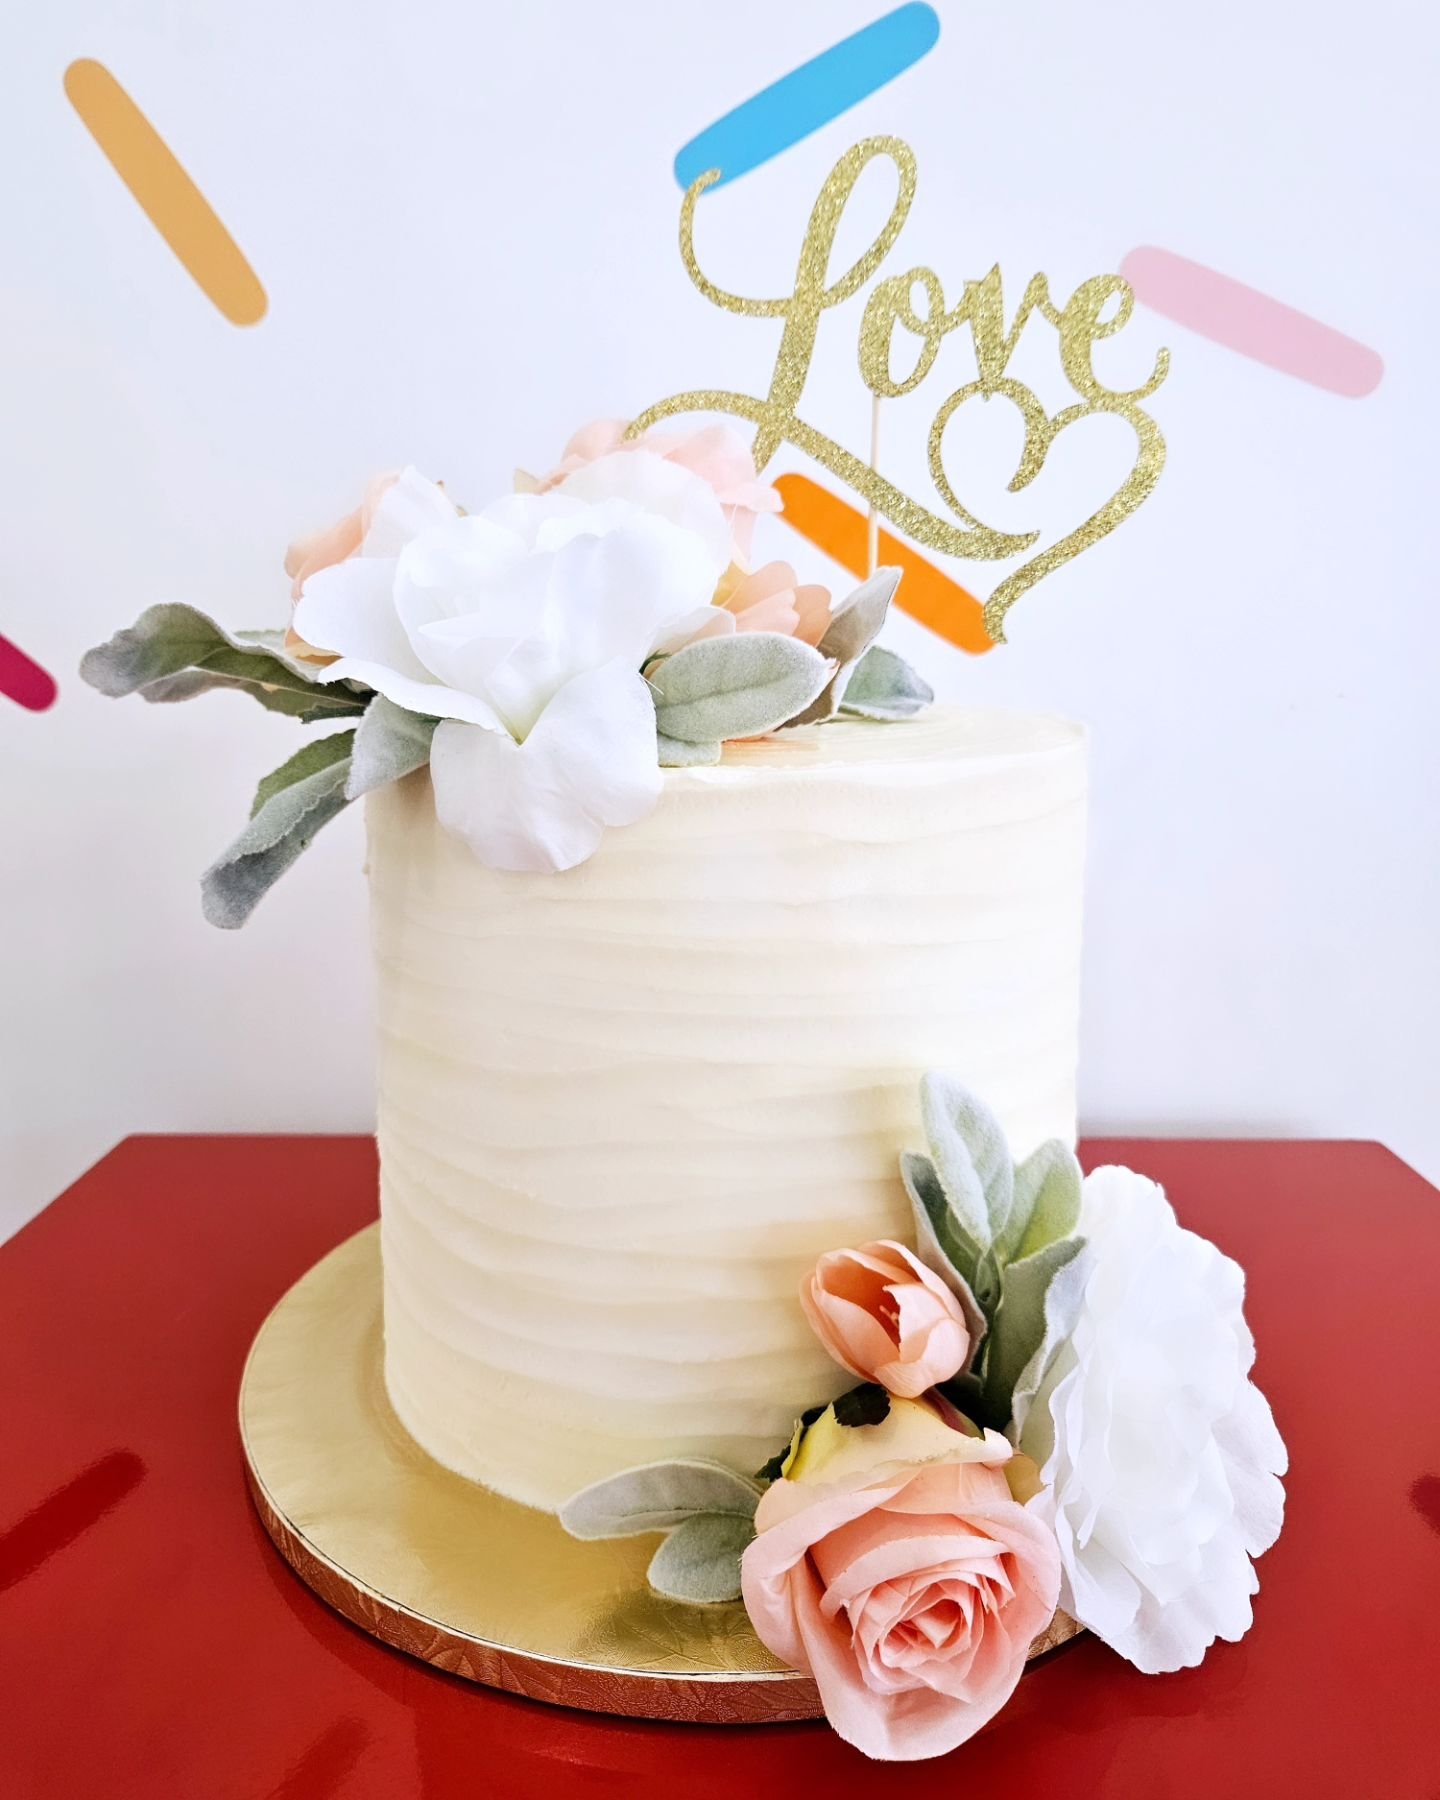 Love is in the air. Congratulations to the happy couple. #weddingcakes #michiganbakers ##michigancustomcakes #michigancakedesigners #dessertfirstlady #dessertfirst